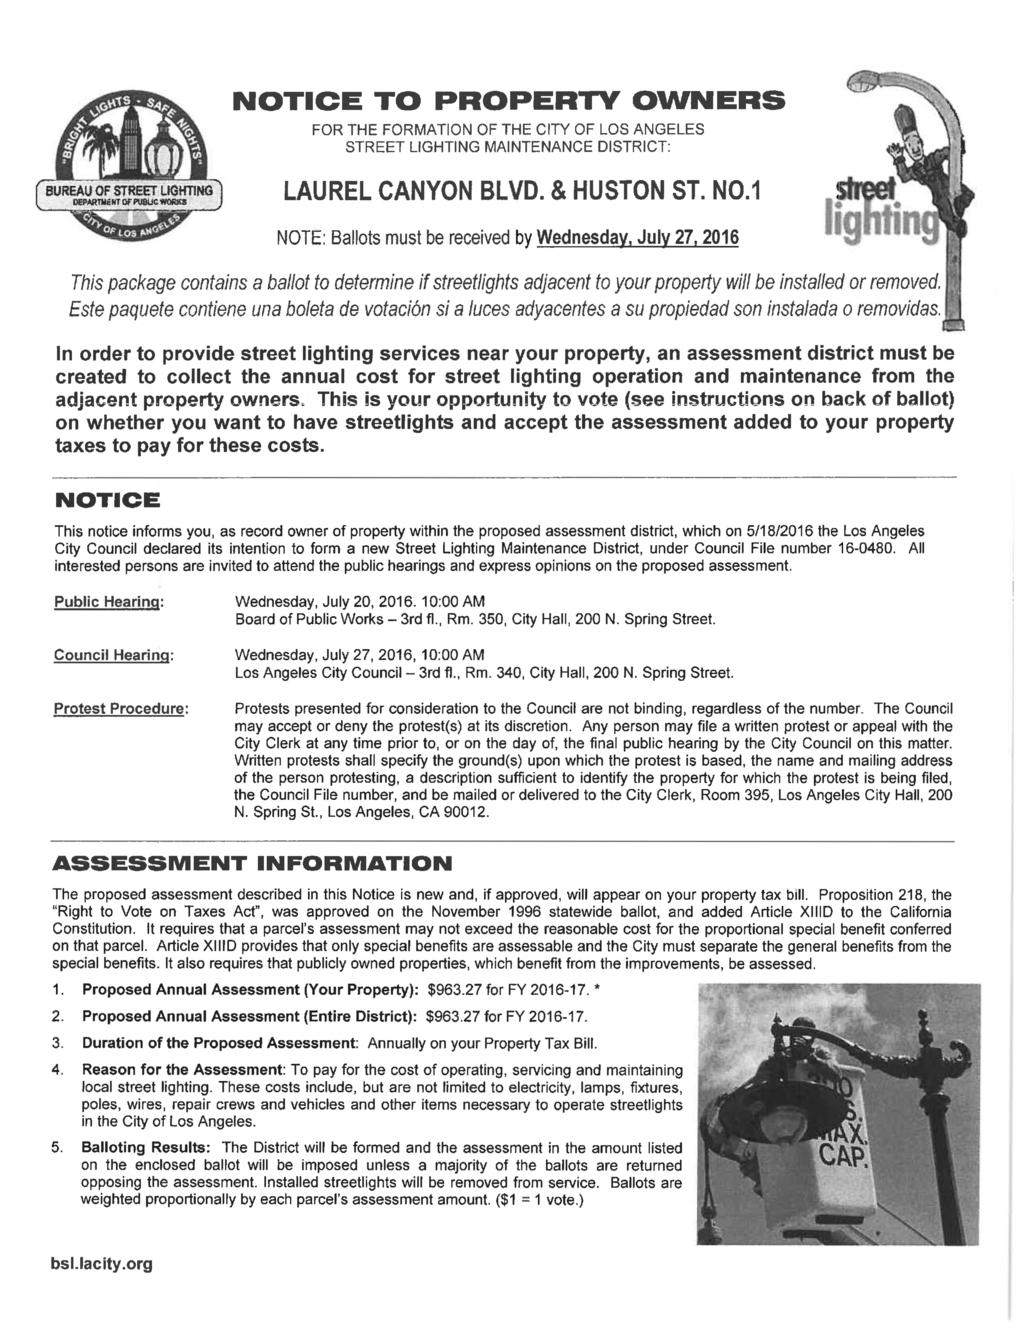 NOTICE TO PROPERTY OWNERS FOR THE FORMATION OF THE CITY OF LOS ANGELES STREET LIGHTING MAINTENANCE DISTRICT: $ M 9 fbureau OF STREET LIGHTING I DEP*»TH»T Of (nisuc WORKS LAUREL CANYON BLVD.